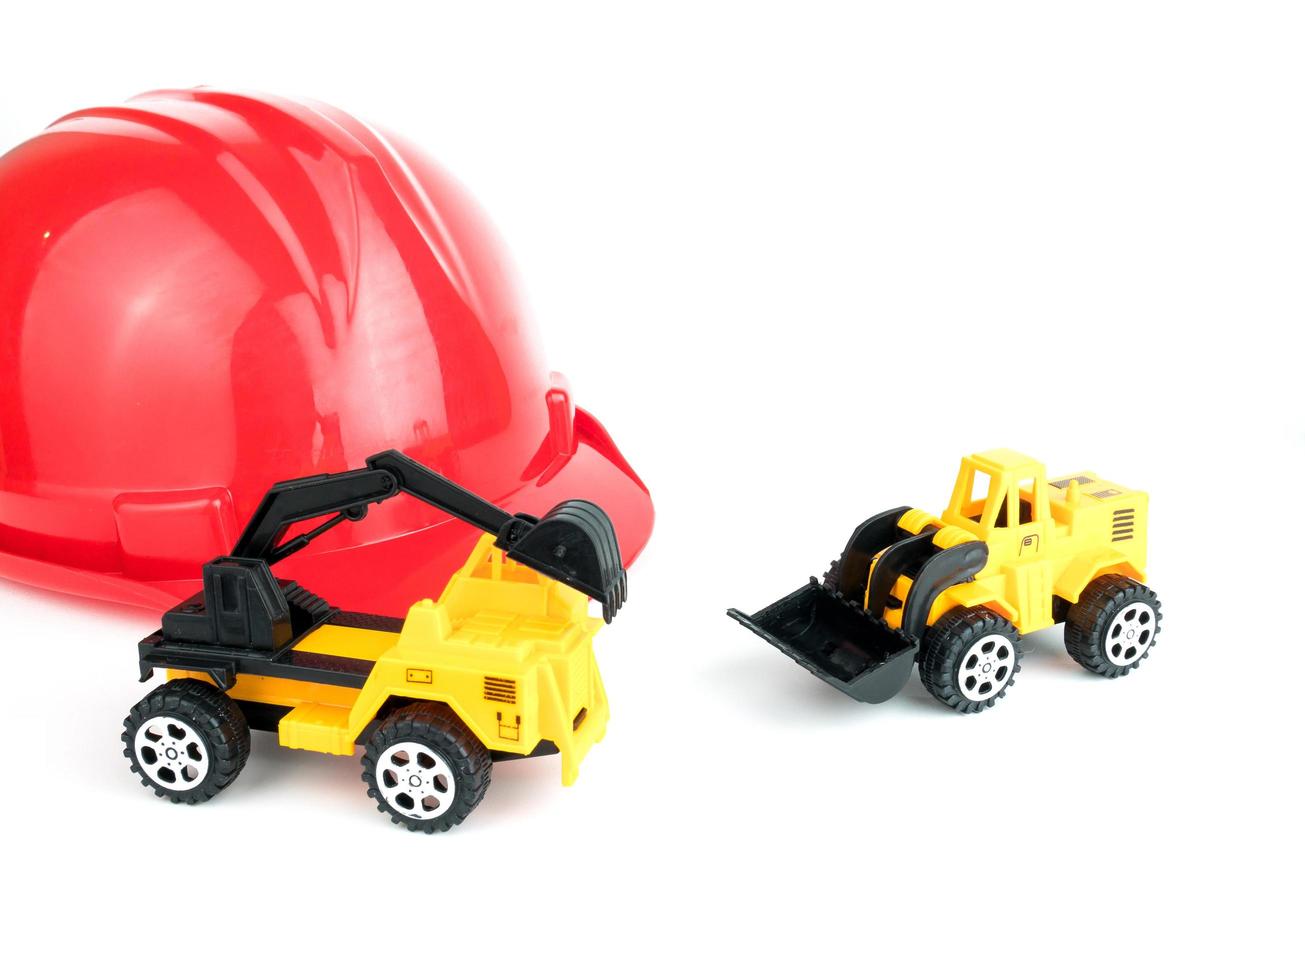 Red safety helmet with Mechanical digger and Bulldozers toy, Engineering construction concept photo